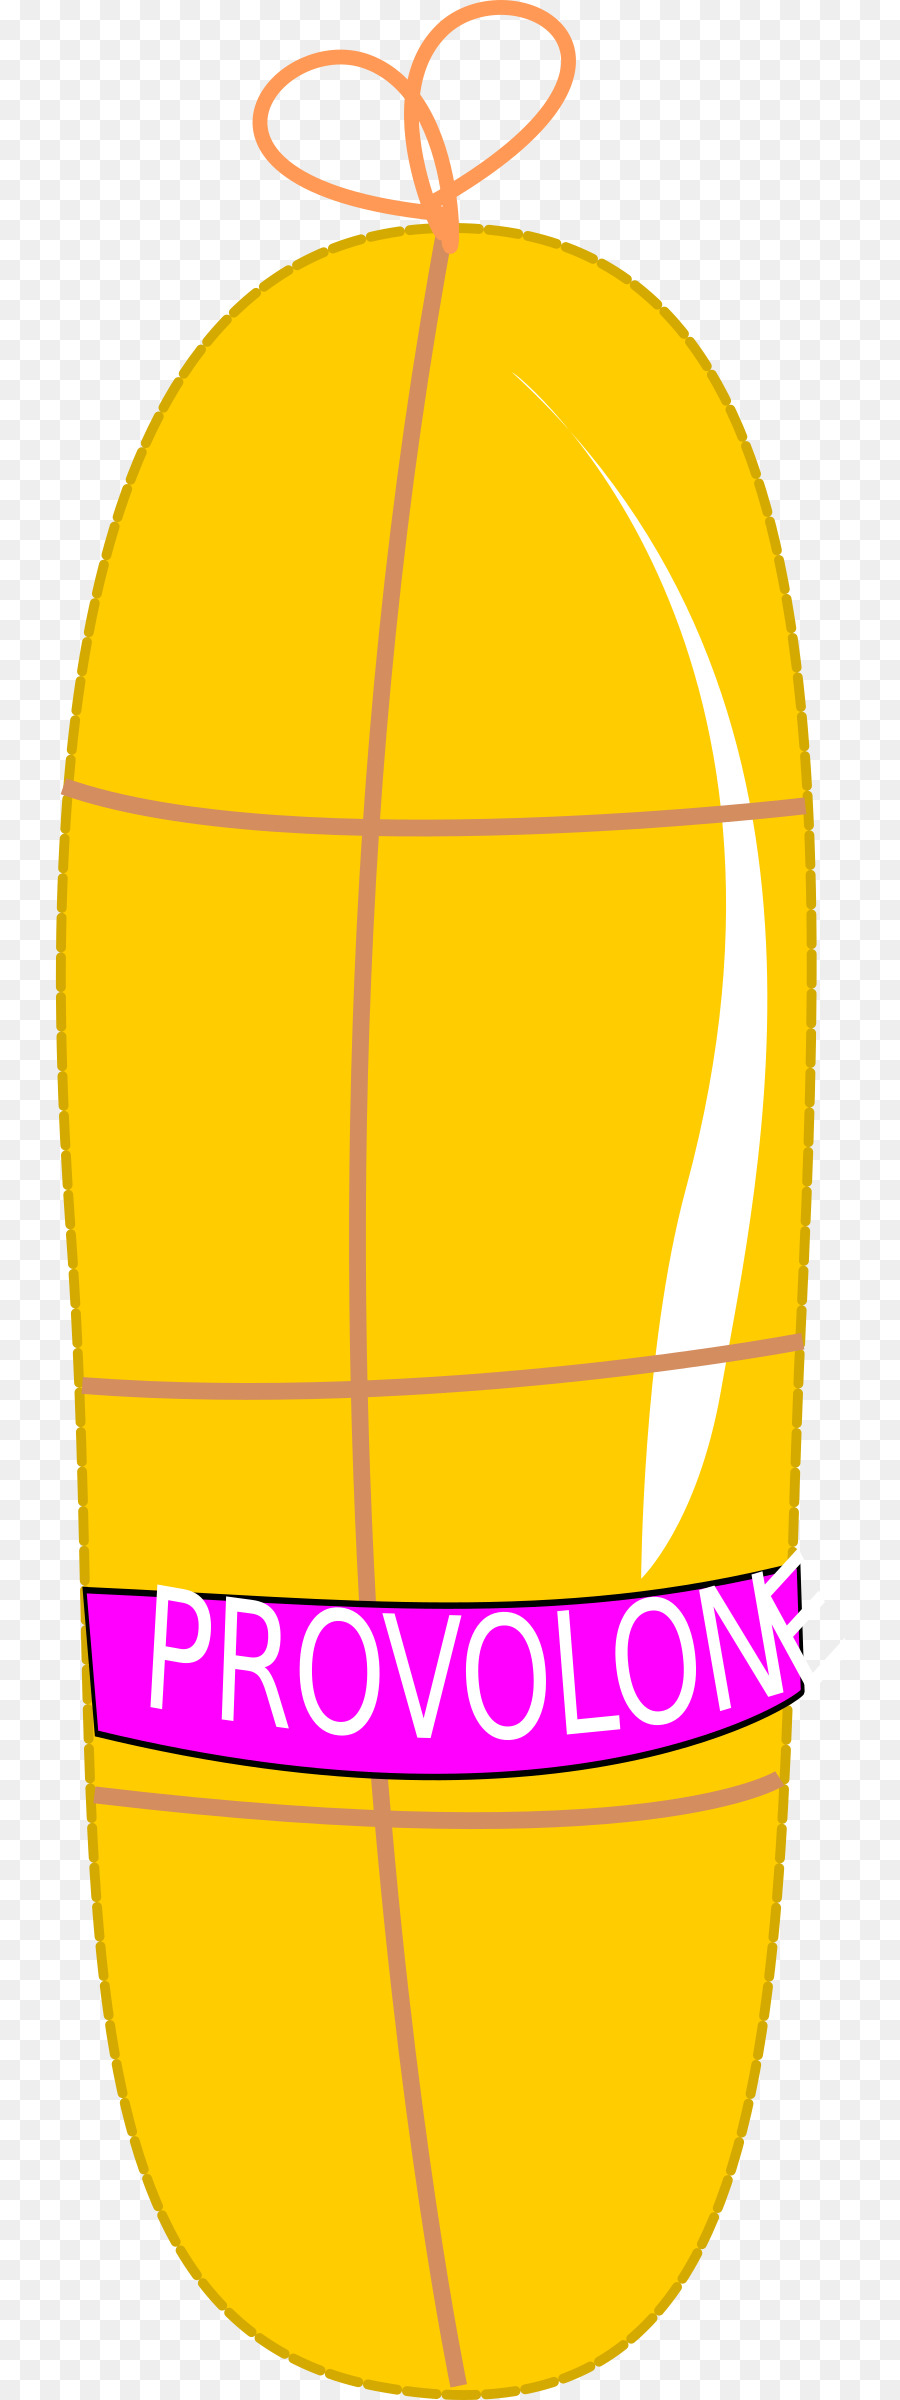 Queso，Queso Provolone PNG